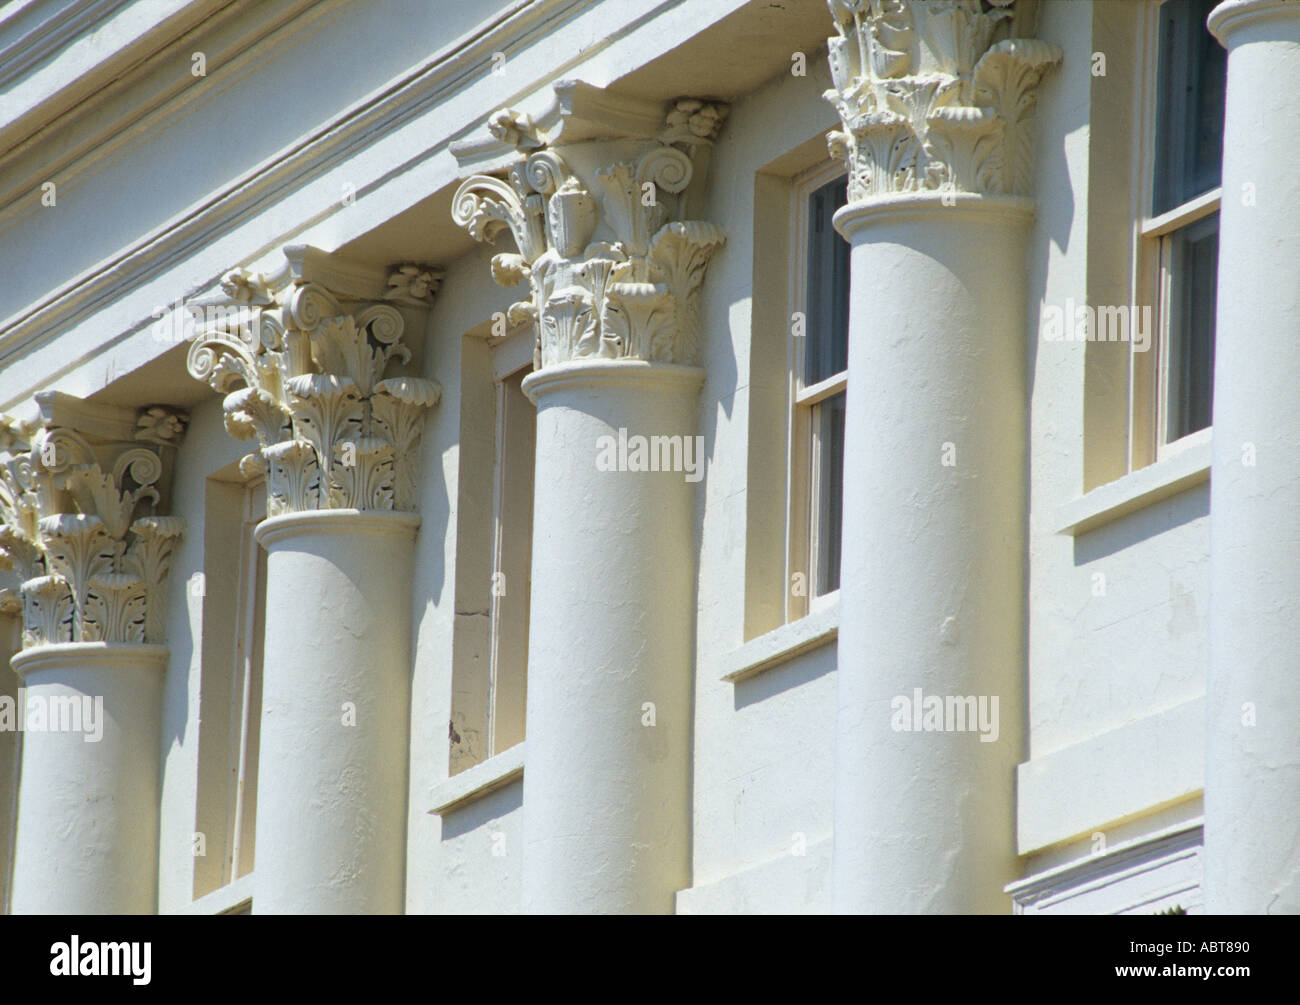 Traditional Architectural Details. Columns with corinthian capitals. Stock Photo